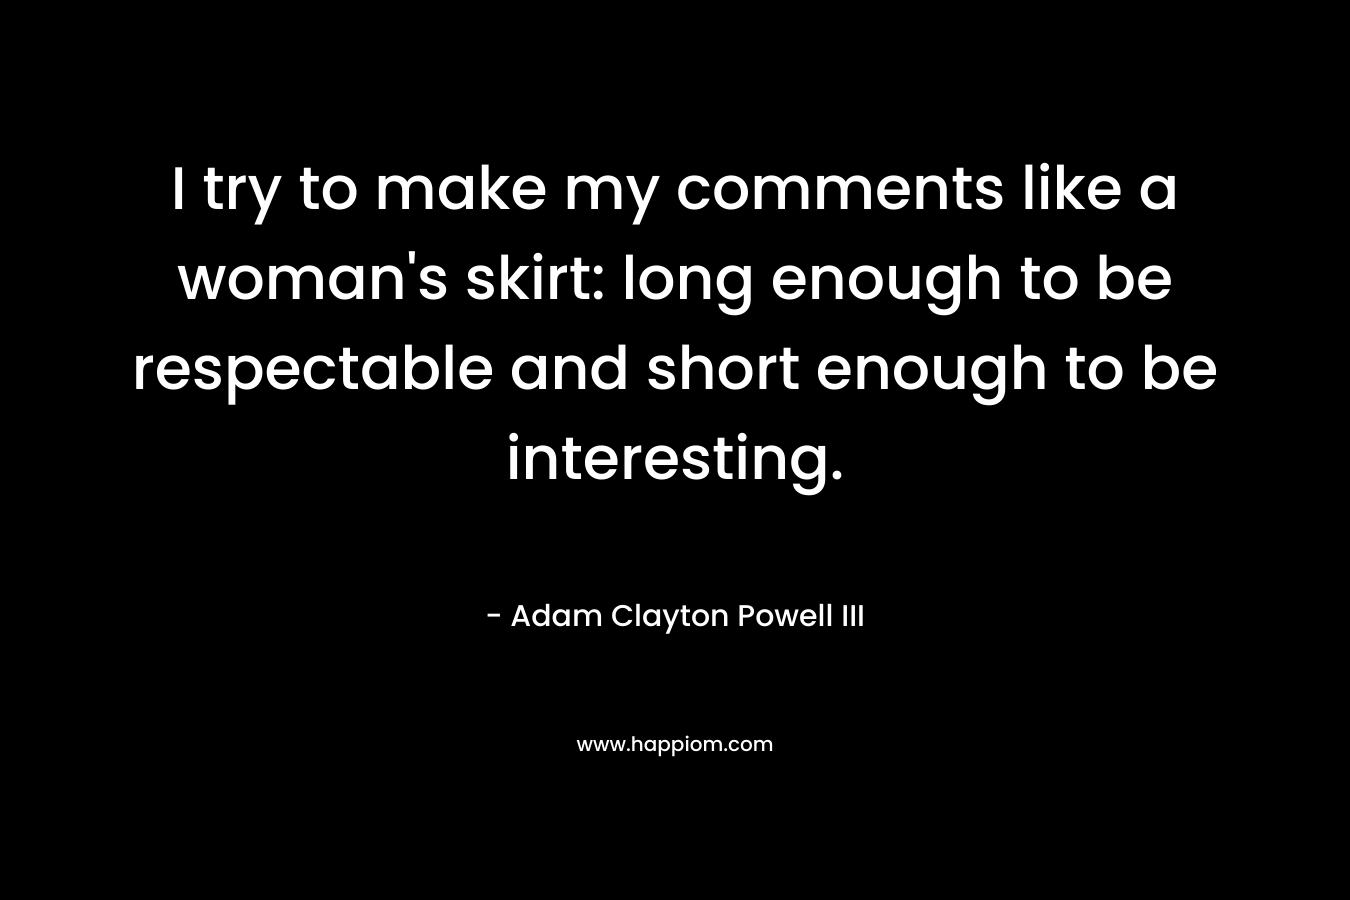 I try to make my comments like a woman's skirt: long enough to be respectable and short enough to be interesting. 